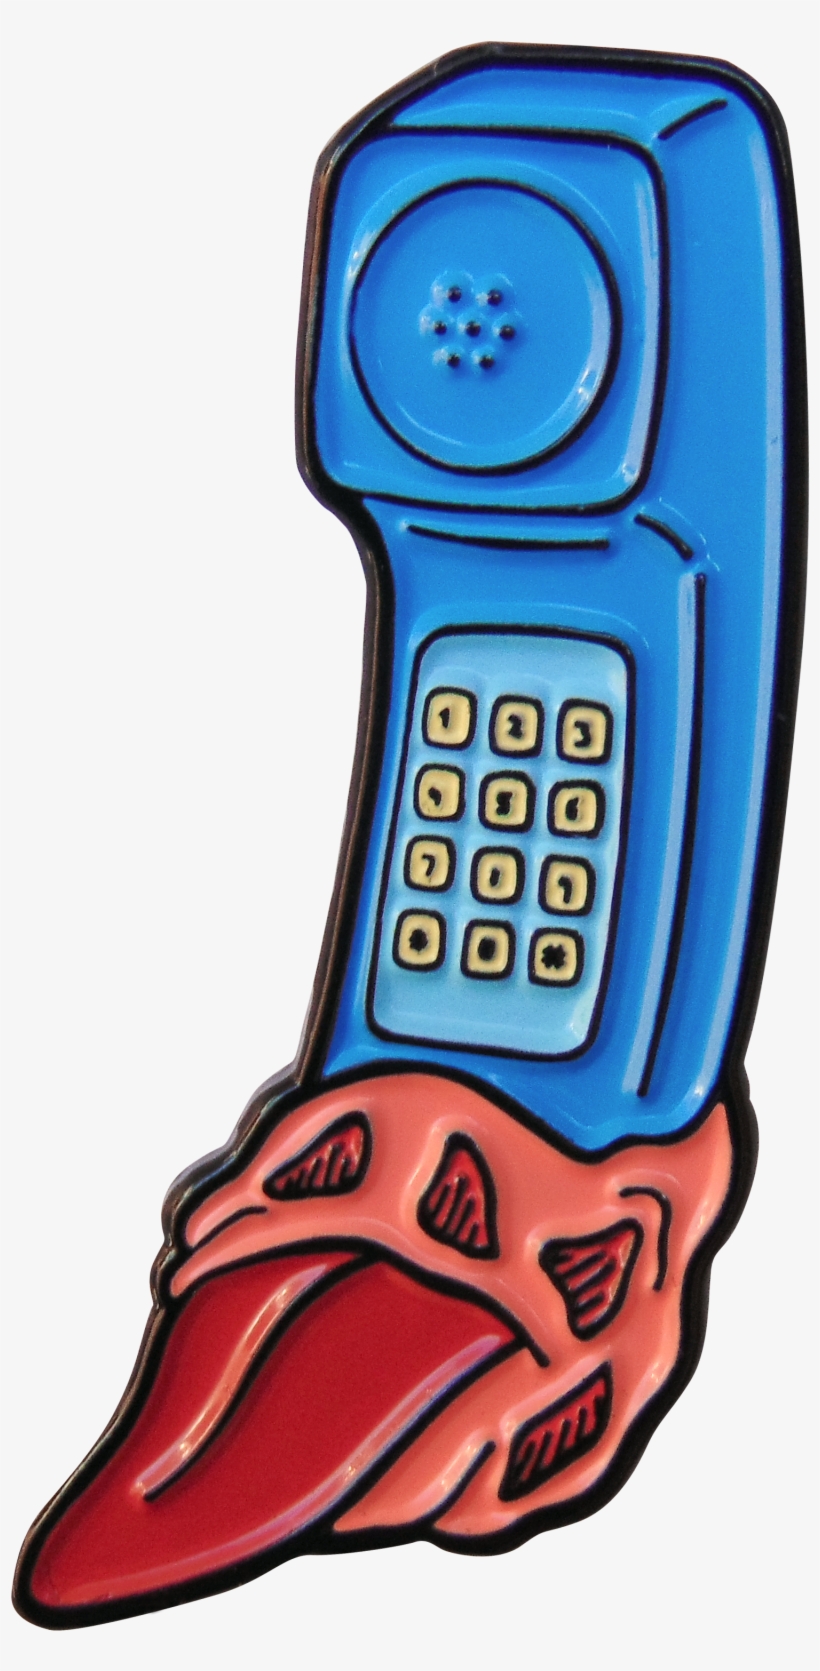 Image Of Hotline Bling Pin - Feature Phone, transparent png #1662274